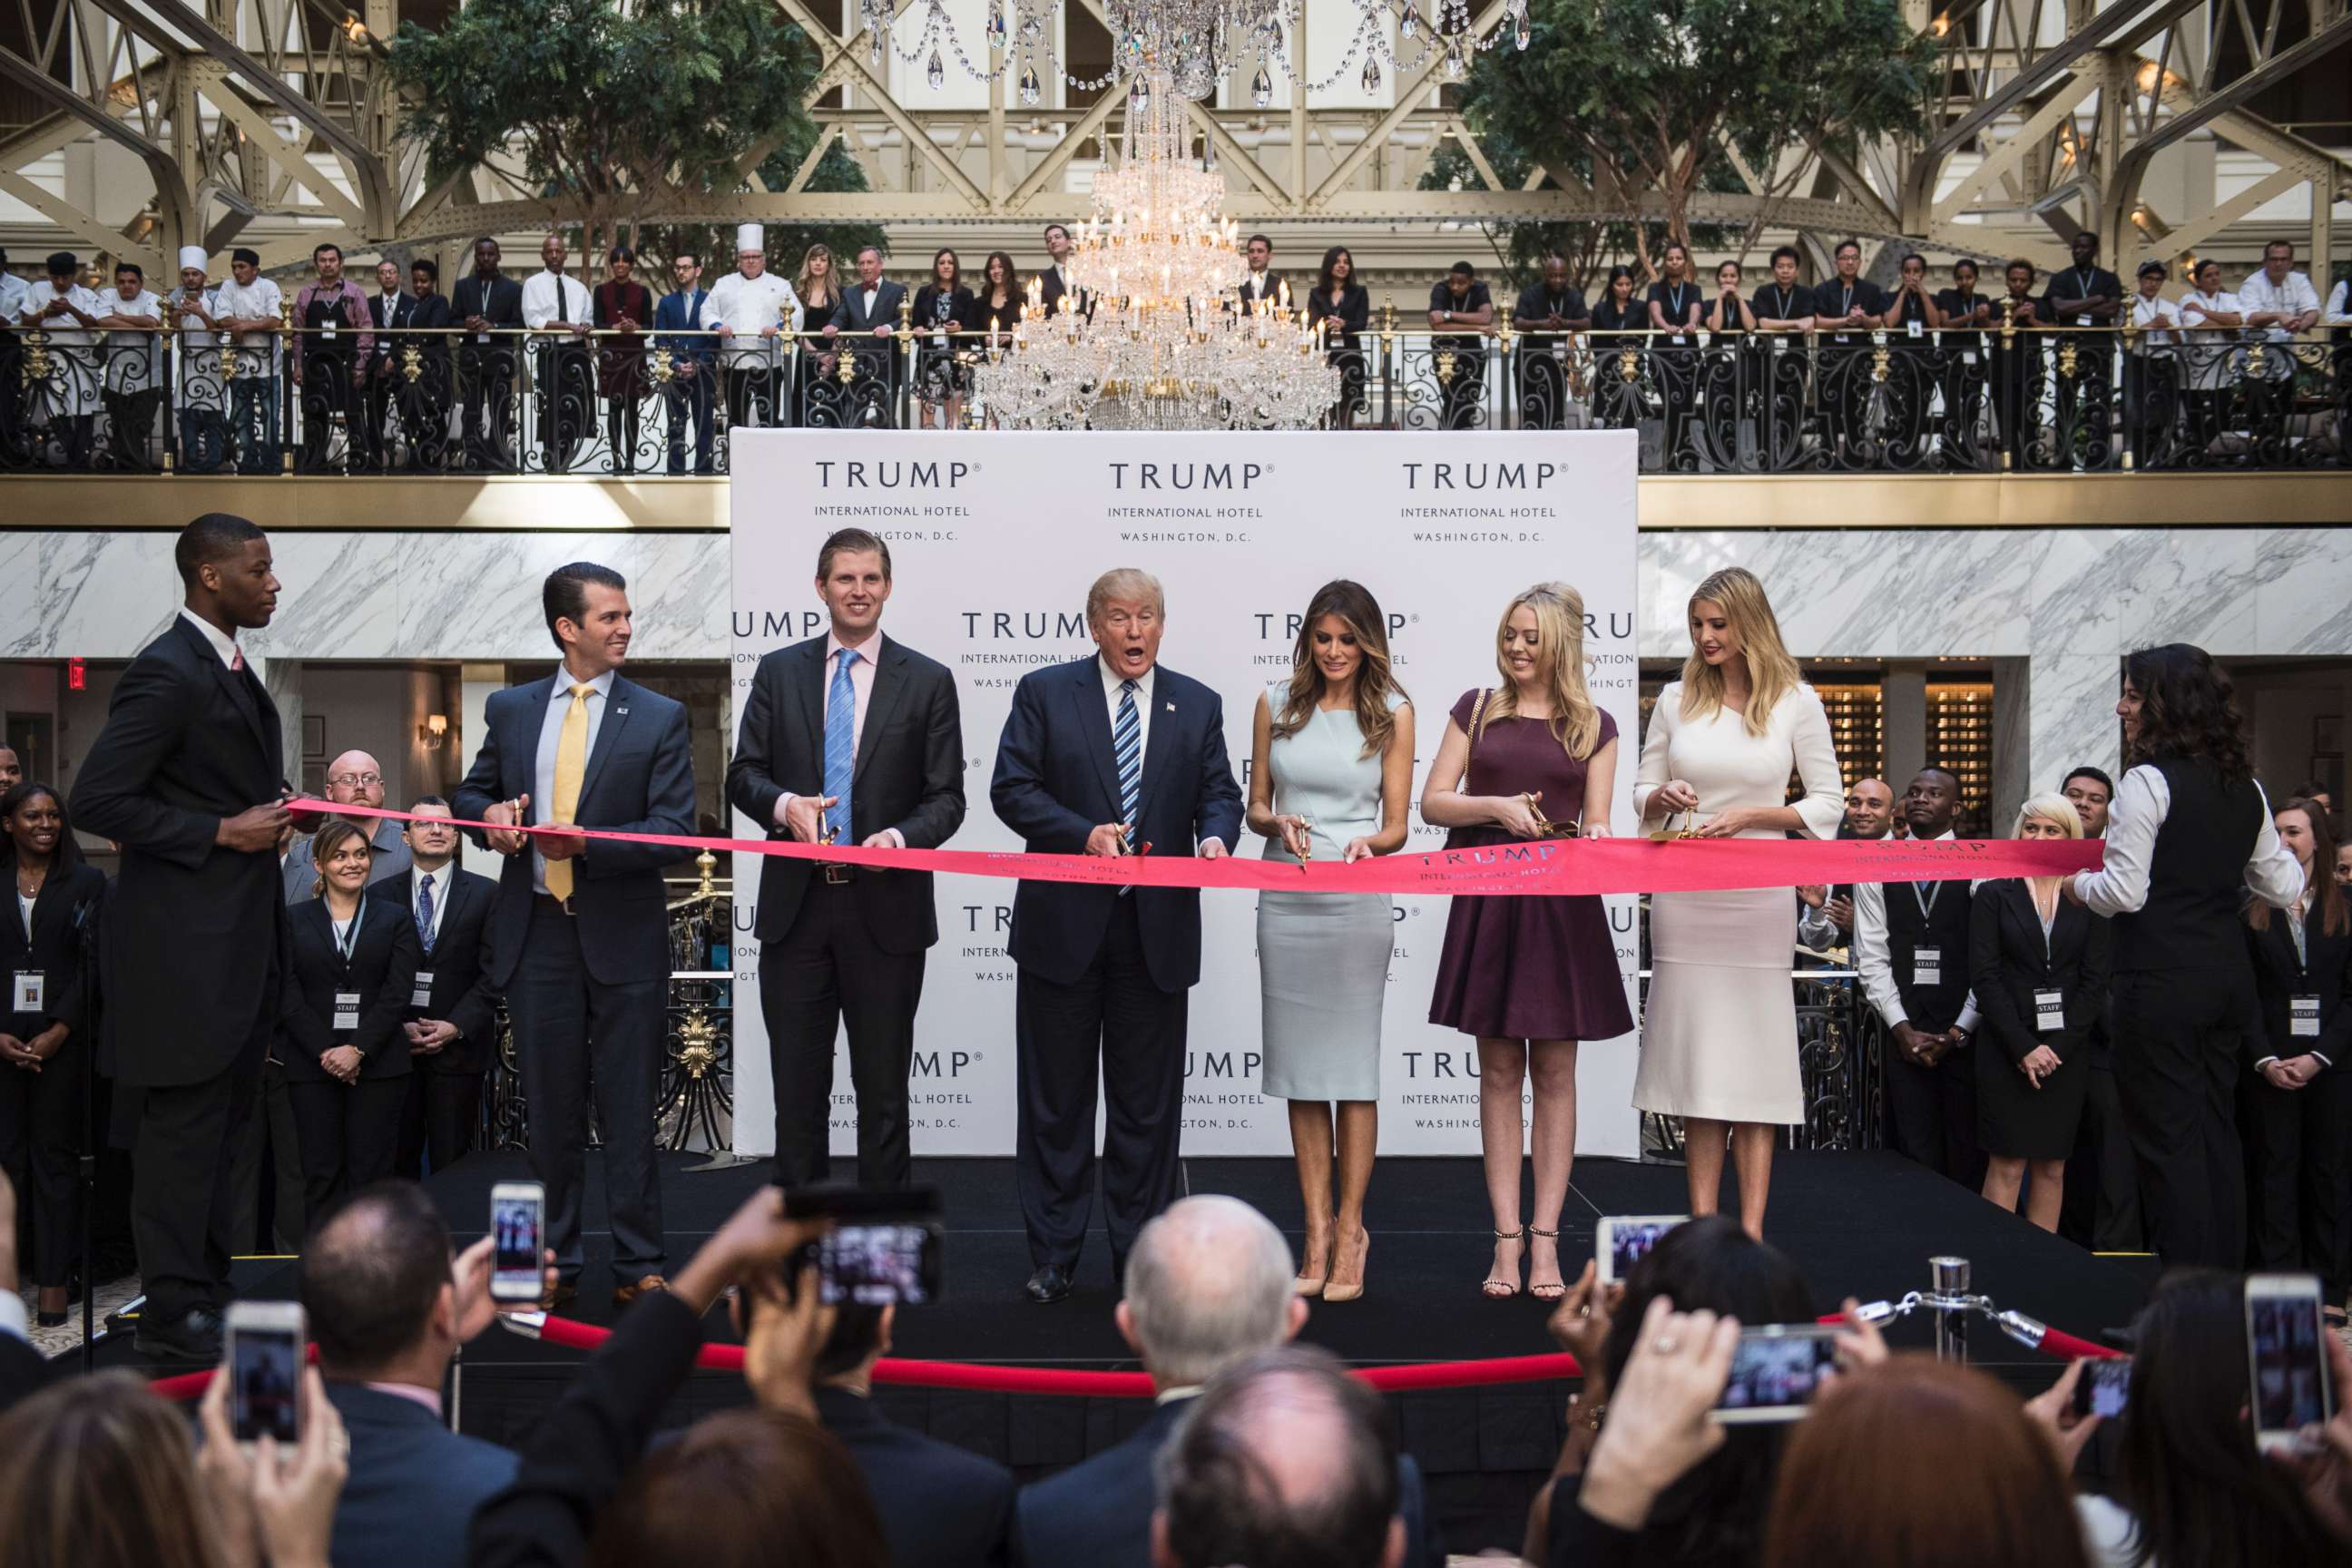 PHOTO: Donald Trump, accompanied by, from left, Donald Trump Jr., Eric Trump, Trump, Tiffany Trump, Melania Trump, and Ivanka Trump, cut a ribbon during the grand opening ceremony of the Trump International Hotel in Washington, D.C., Oct. 26, 2016.